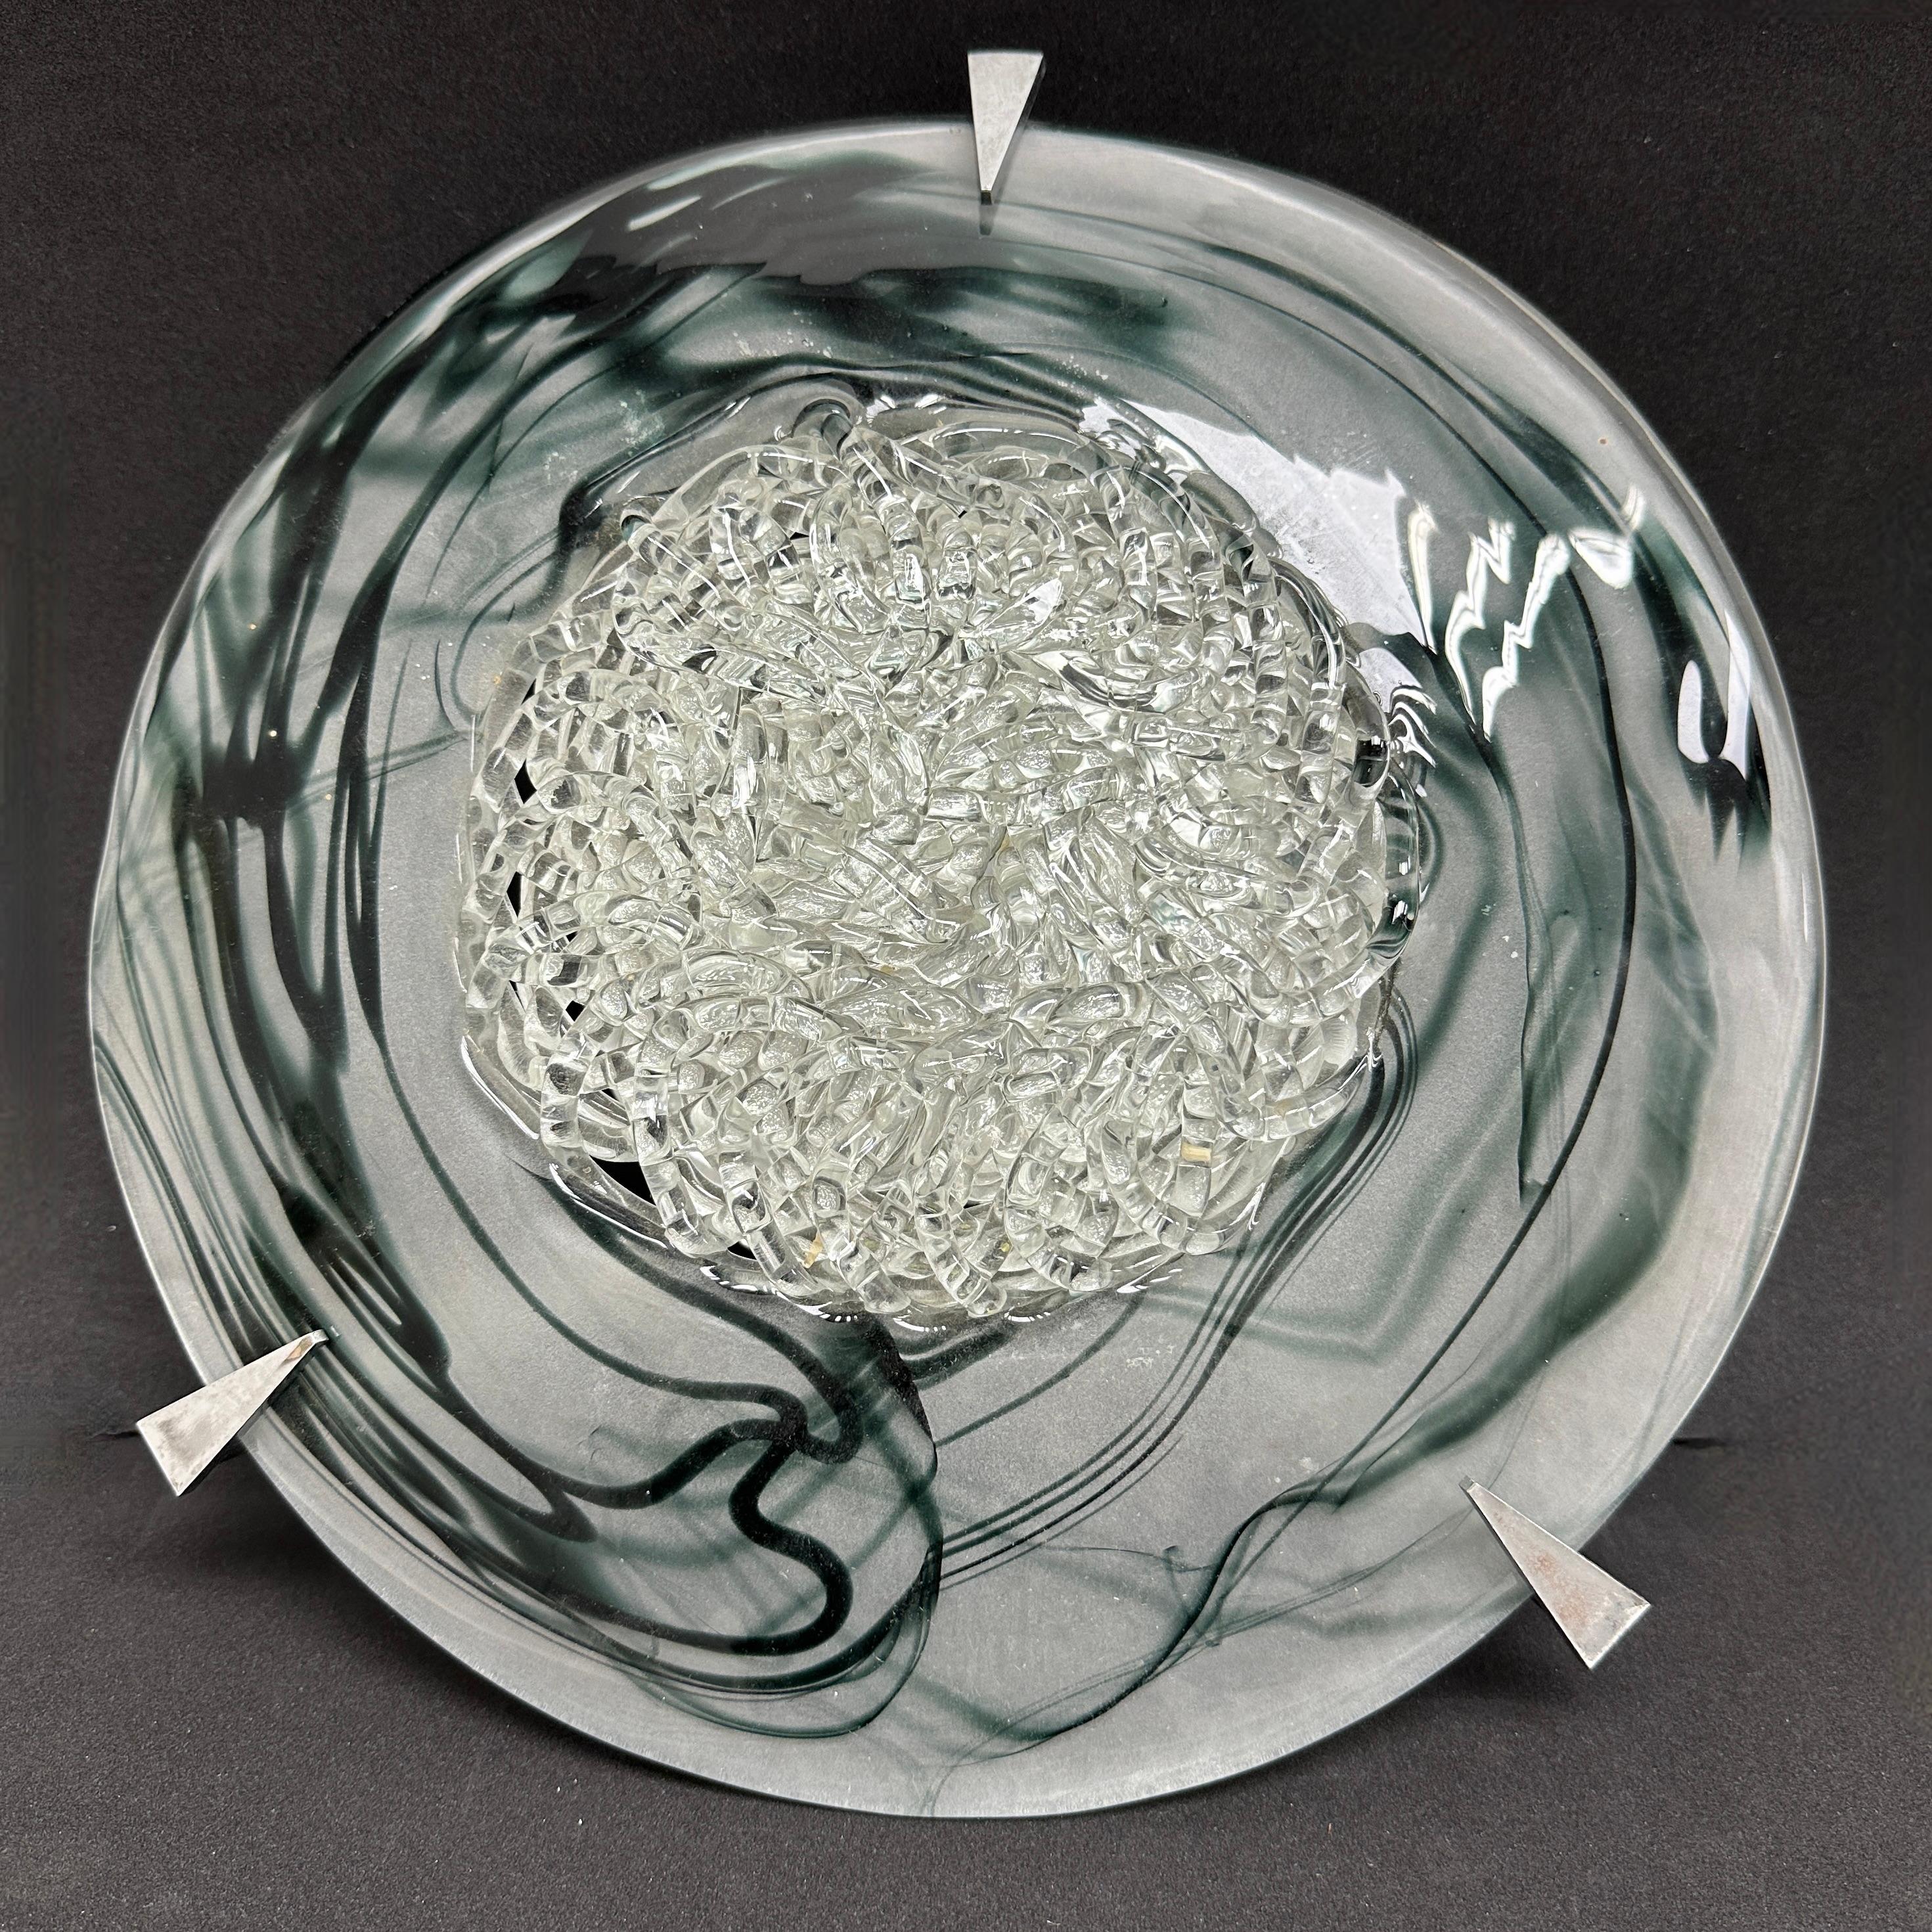 A beautiful Murano glass flush mount or wall light. Made in Italy in the 1980s. Gorgeous textured glass flush mount with metal fixture.The Fixture requires 0 European E14 / 110 Volt Candelabra bulbs, each bulb up to 60 watts. A nice addition to any